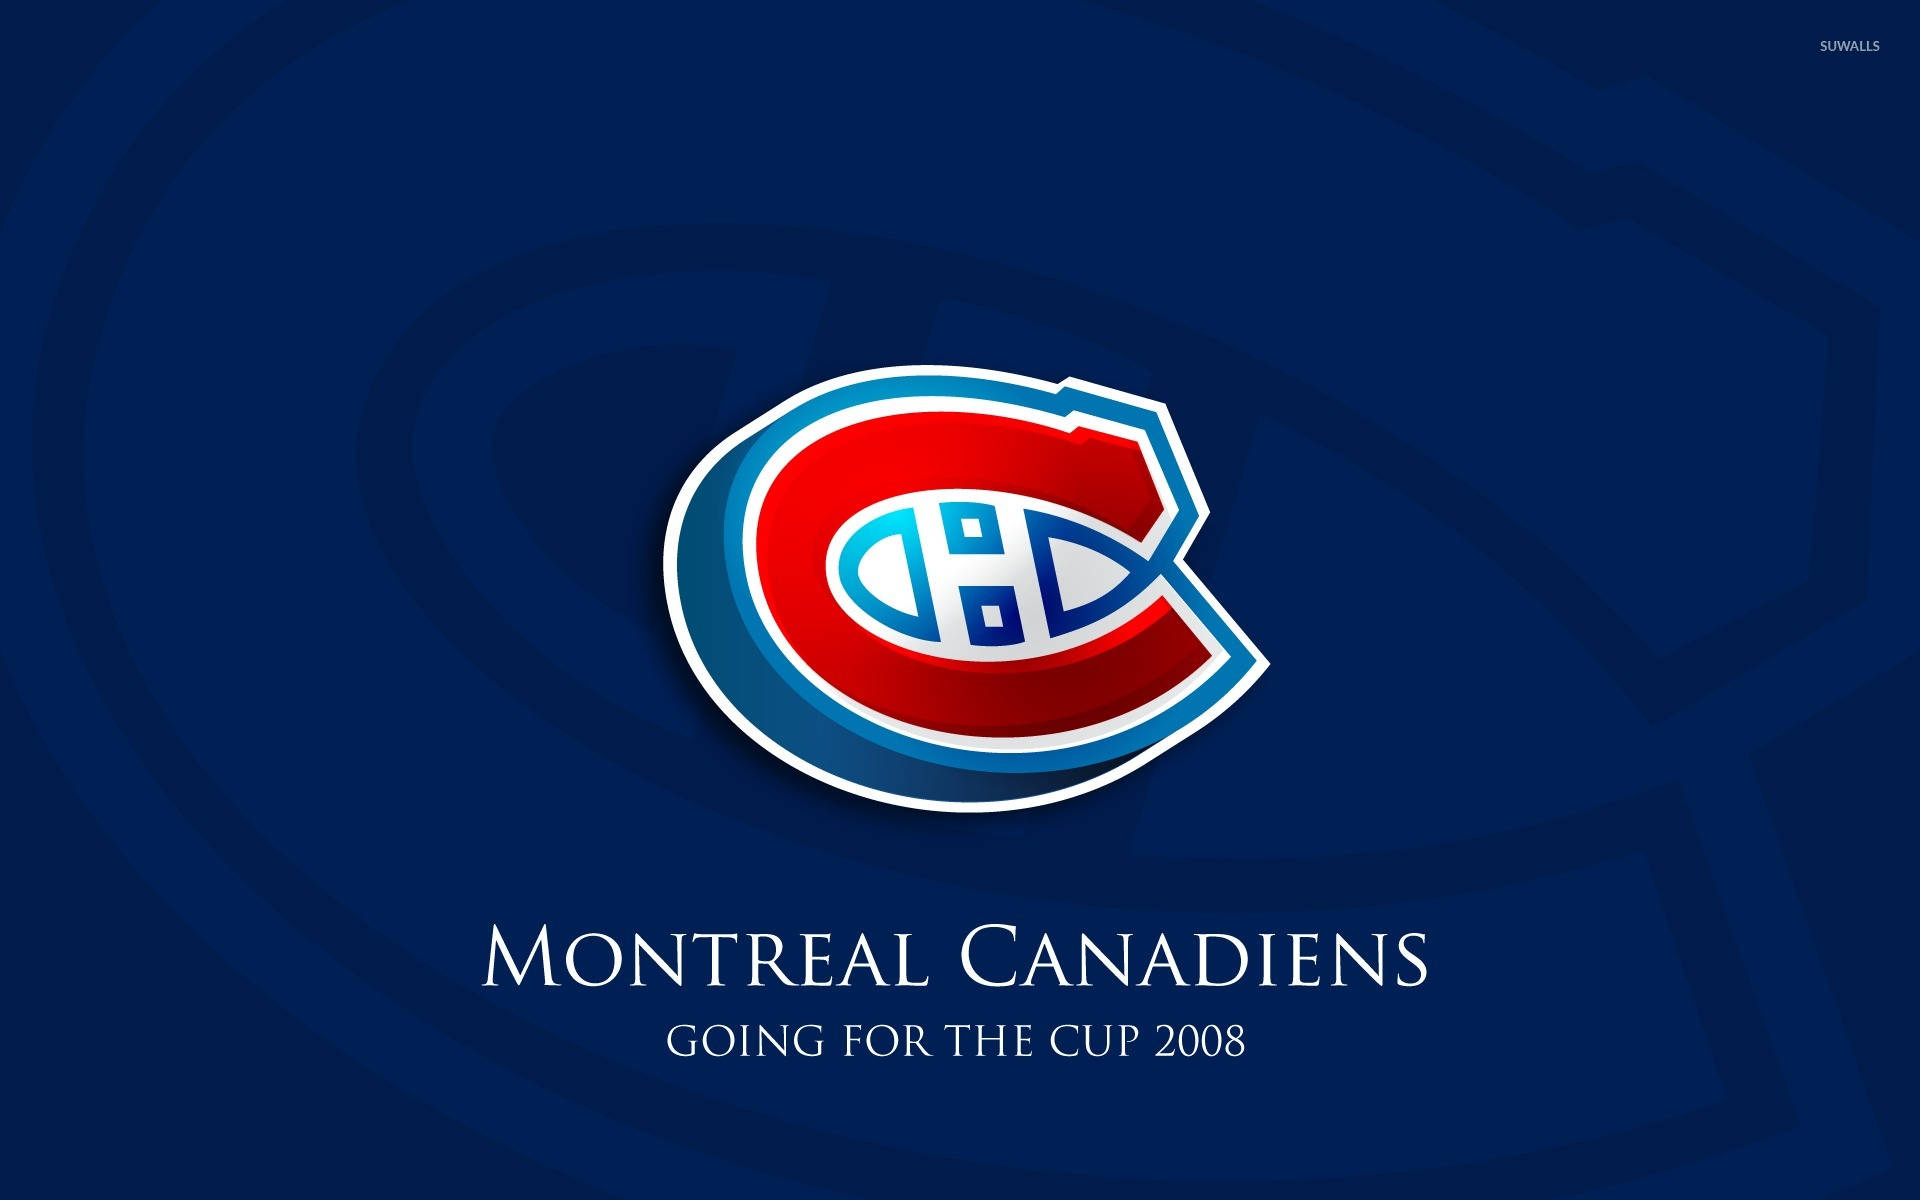 Montreal Canadiens Cup 2008 Background